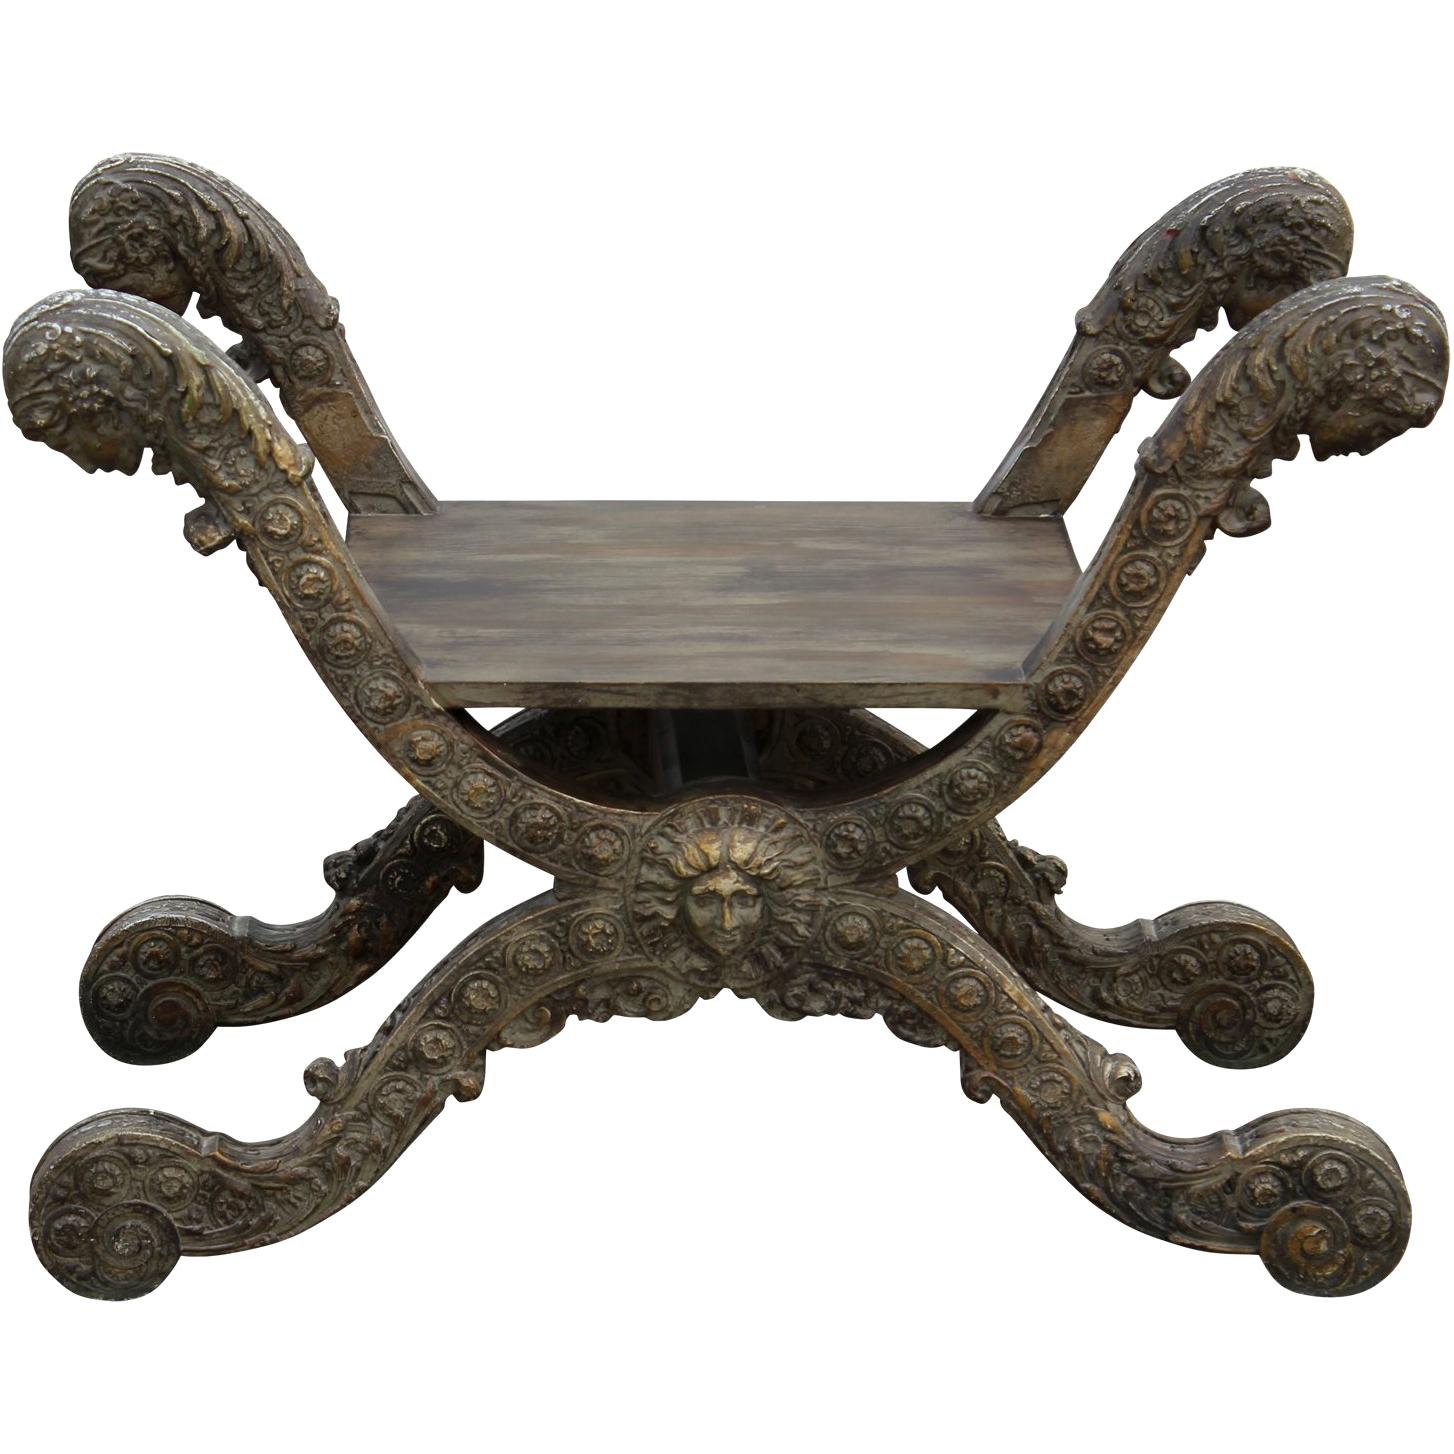 French Renaissance Style Curule Resin and Wood Stool or Bench